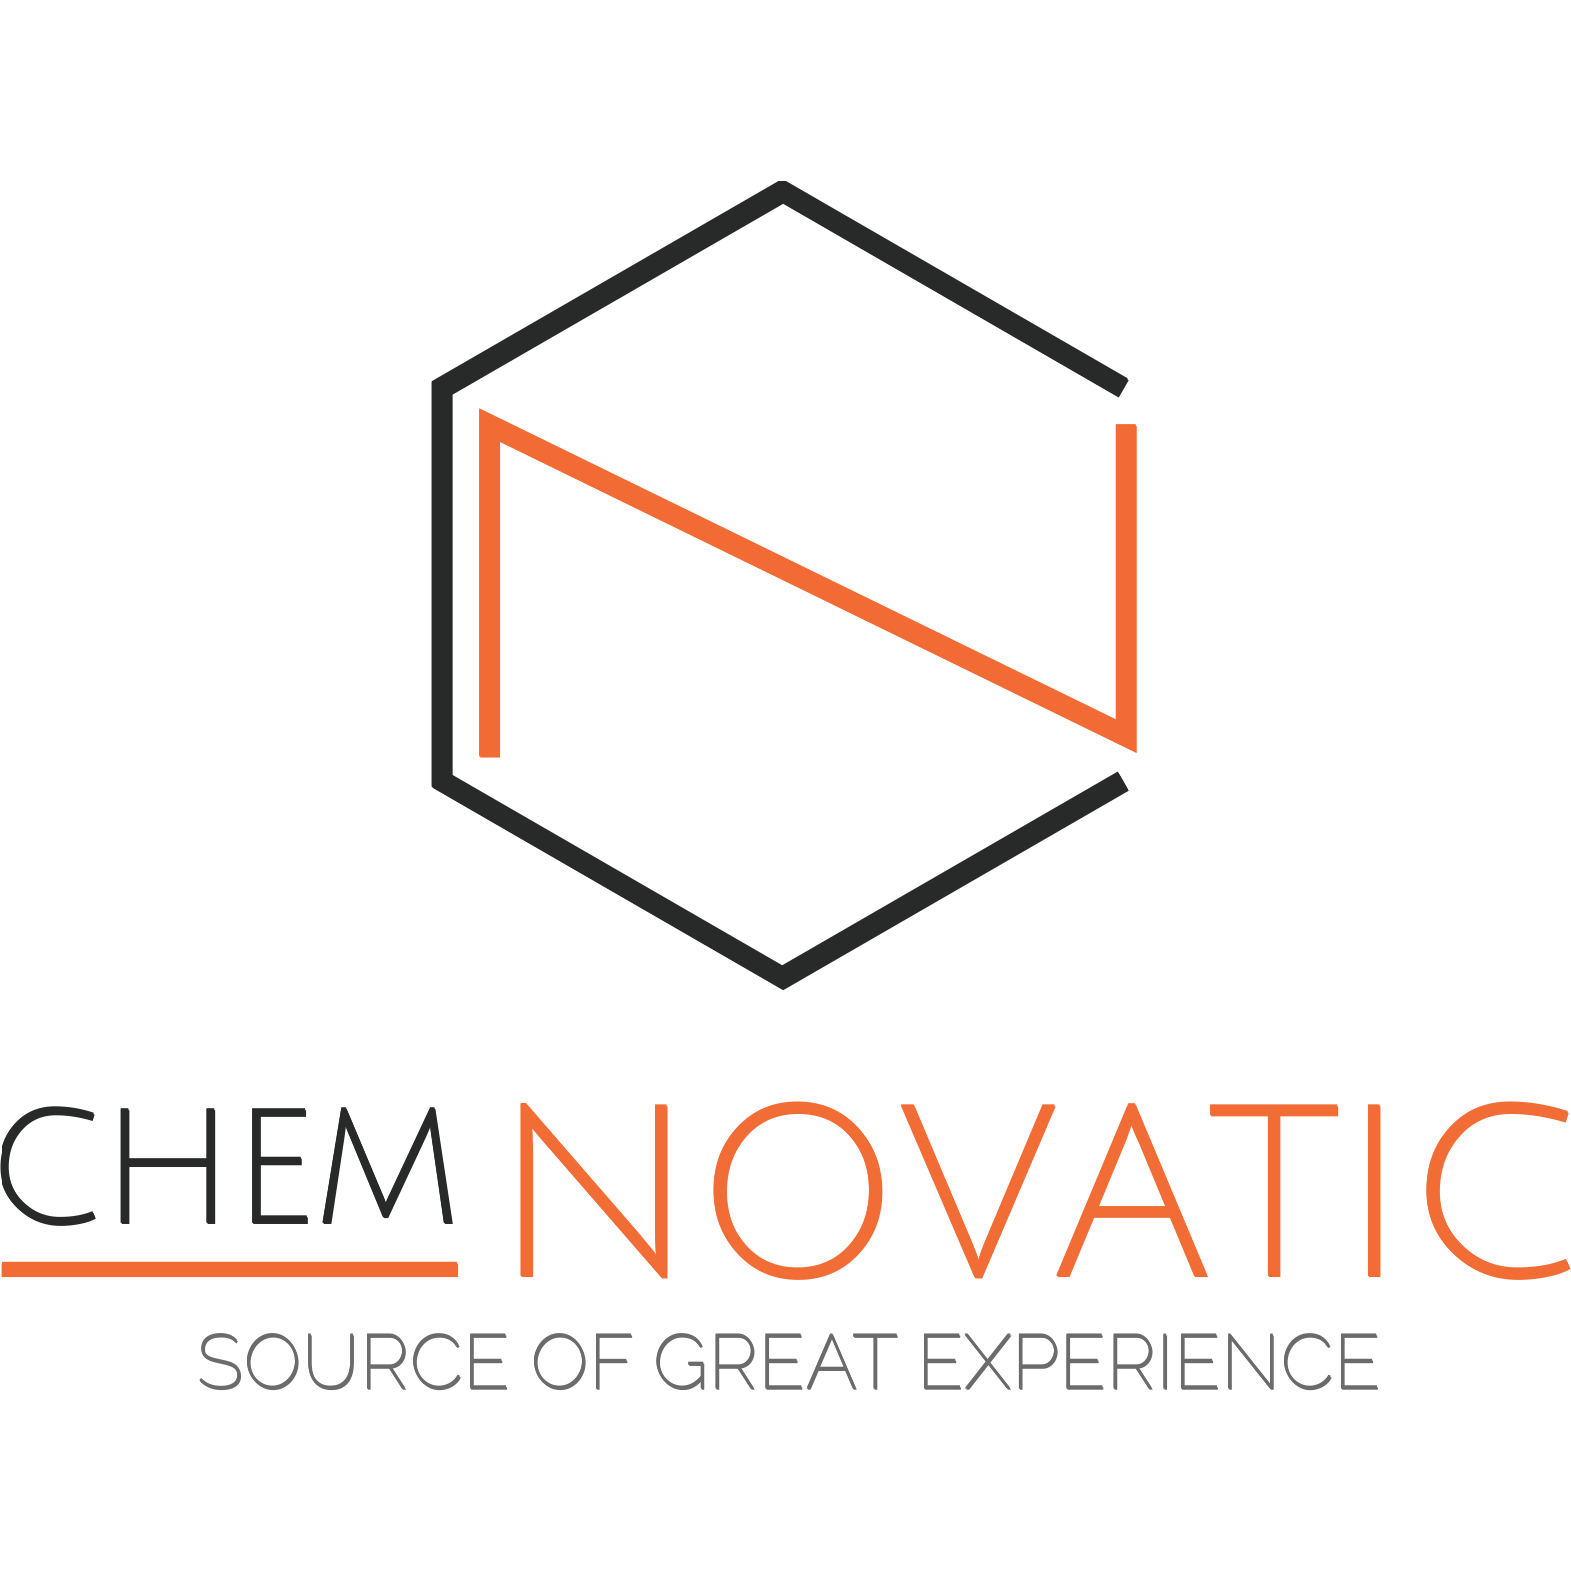 chemnovatic logo and motto: source of great experience